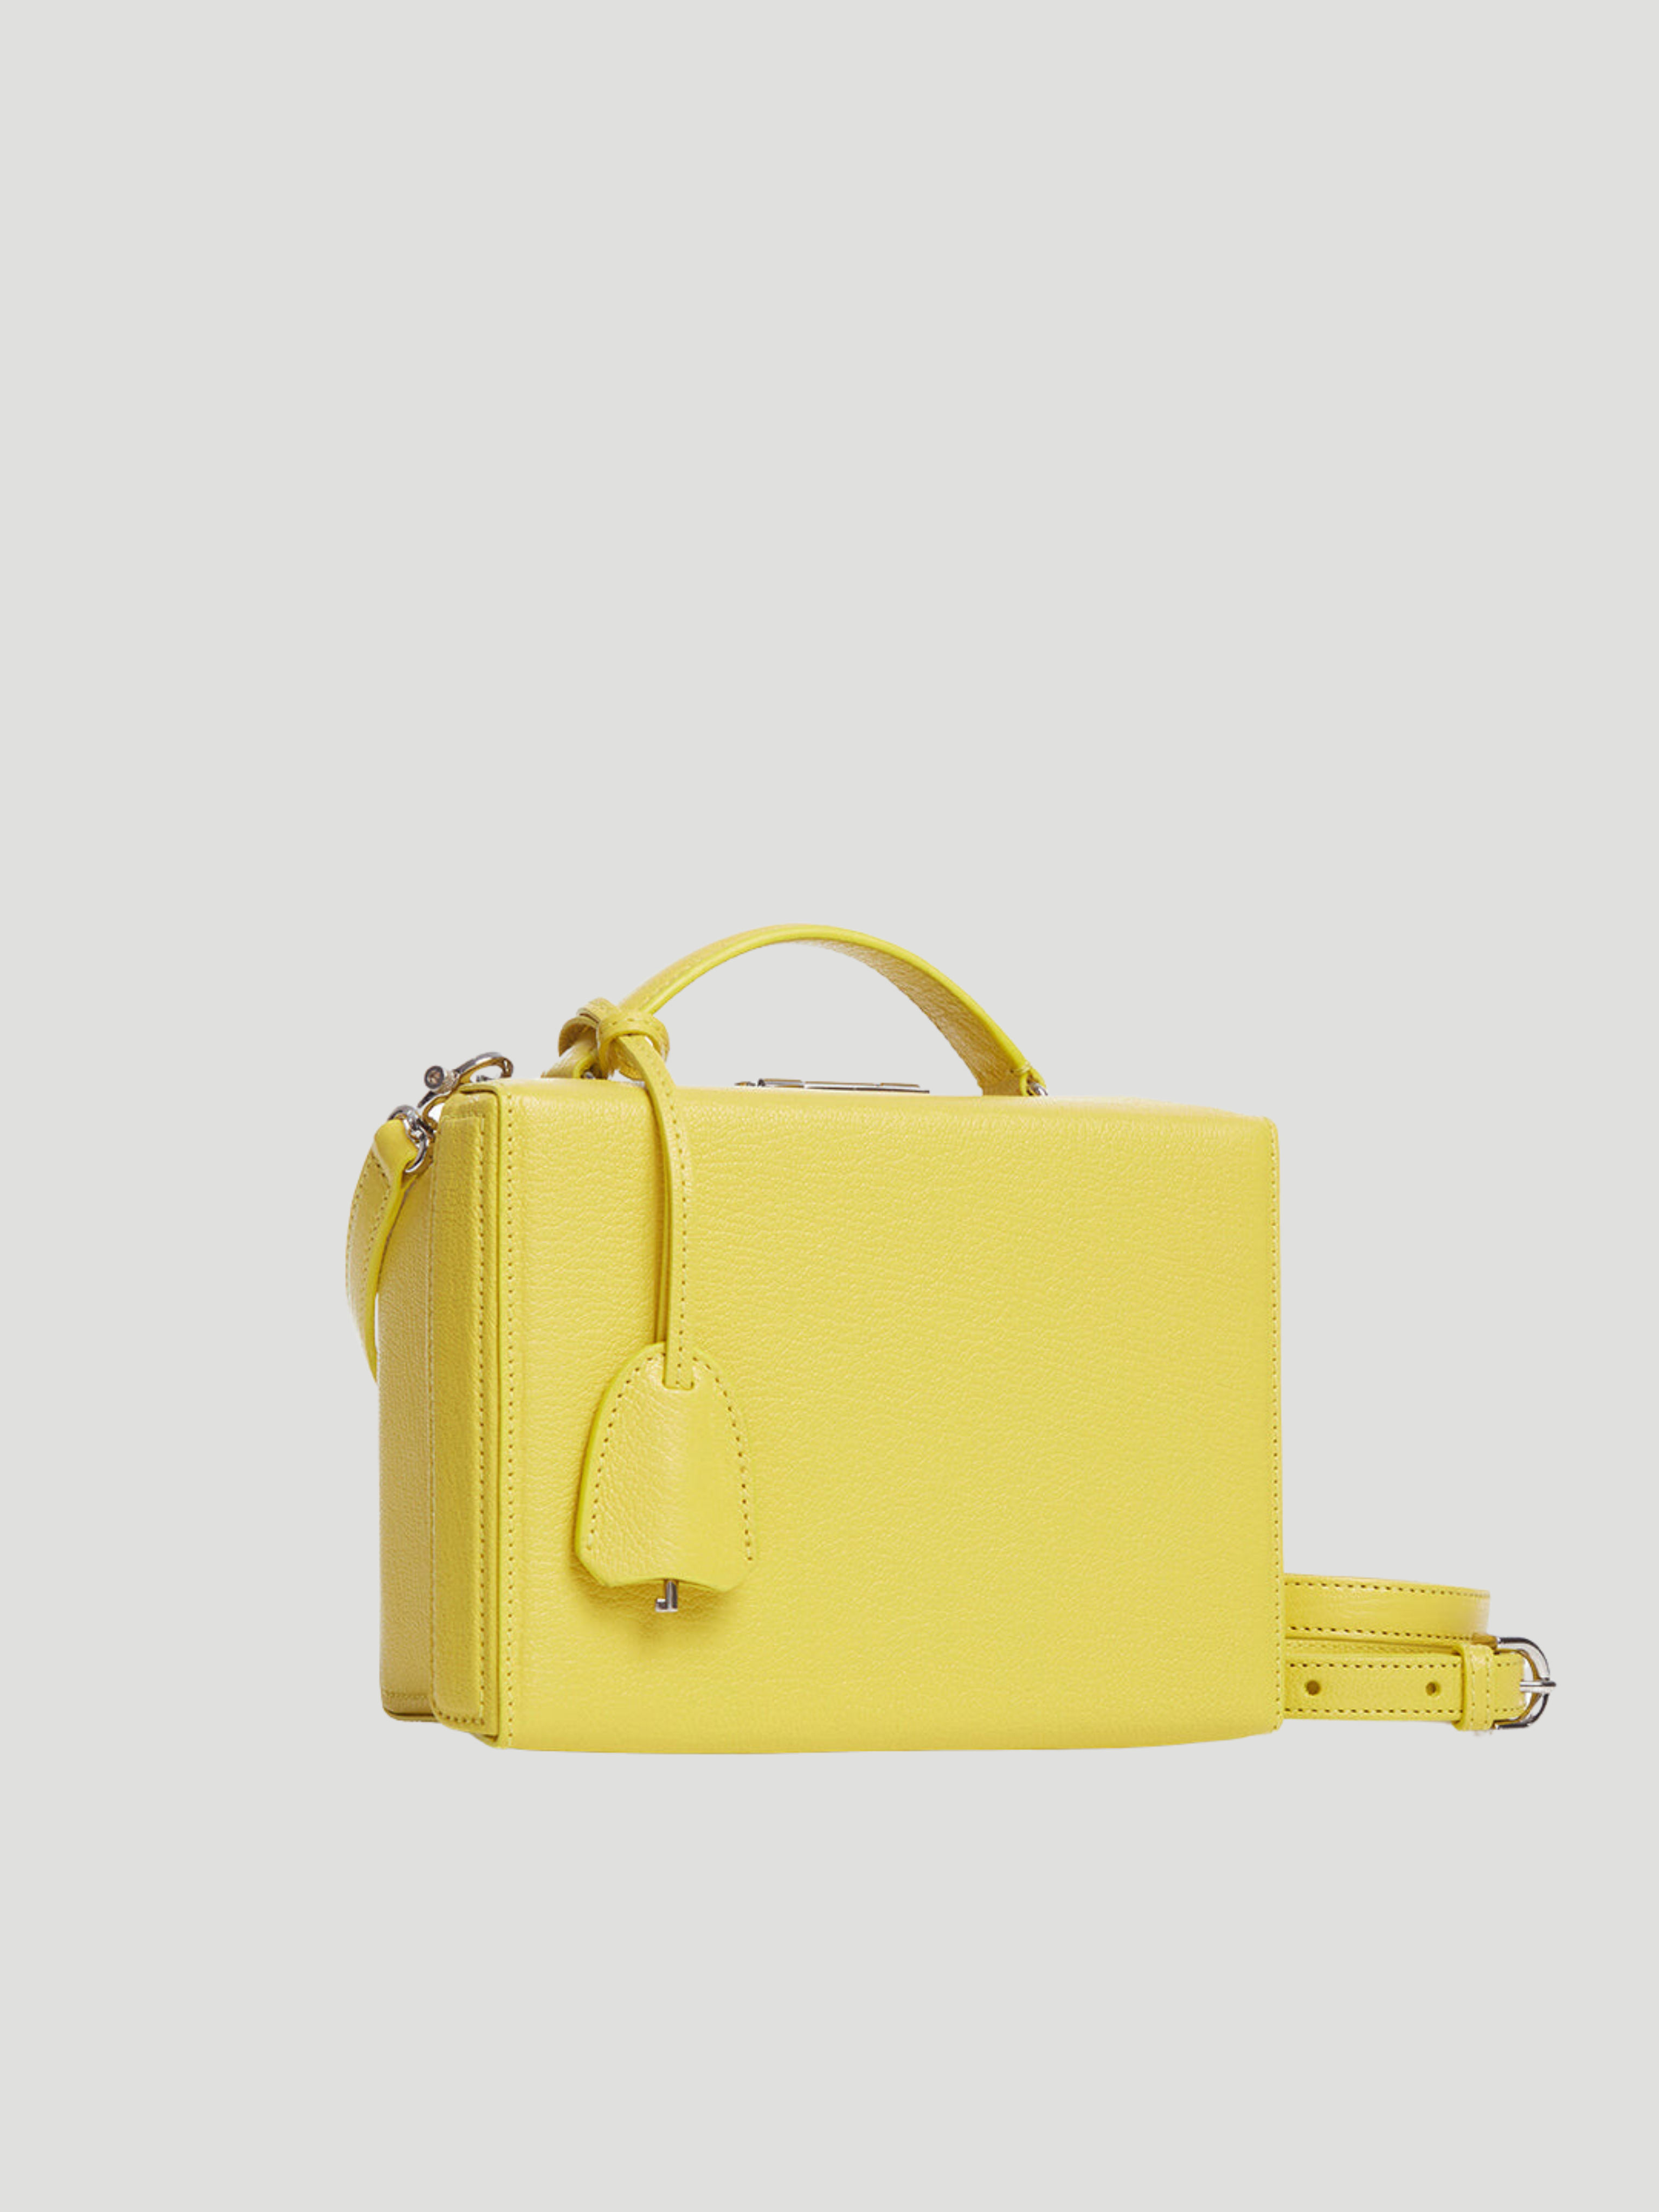 Marc Jacobs - Tia Jonsson with The Box Bag in Yellow | Facebook